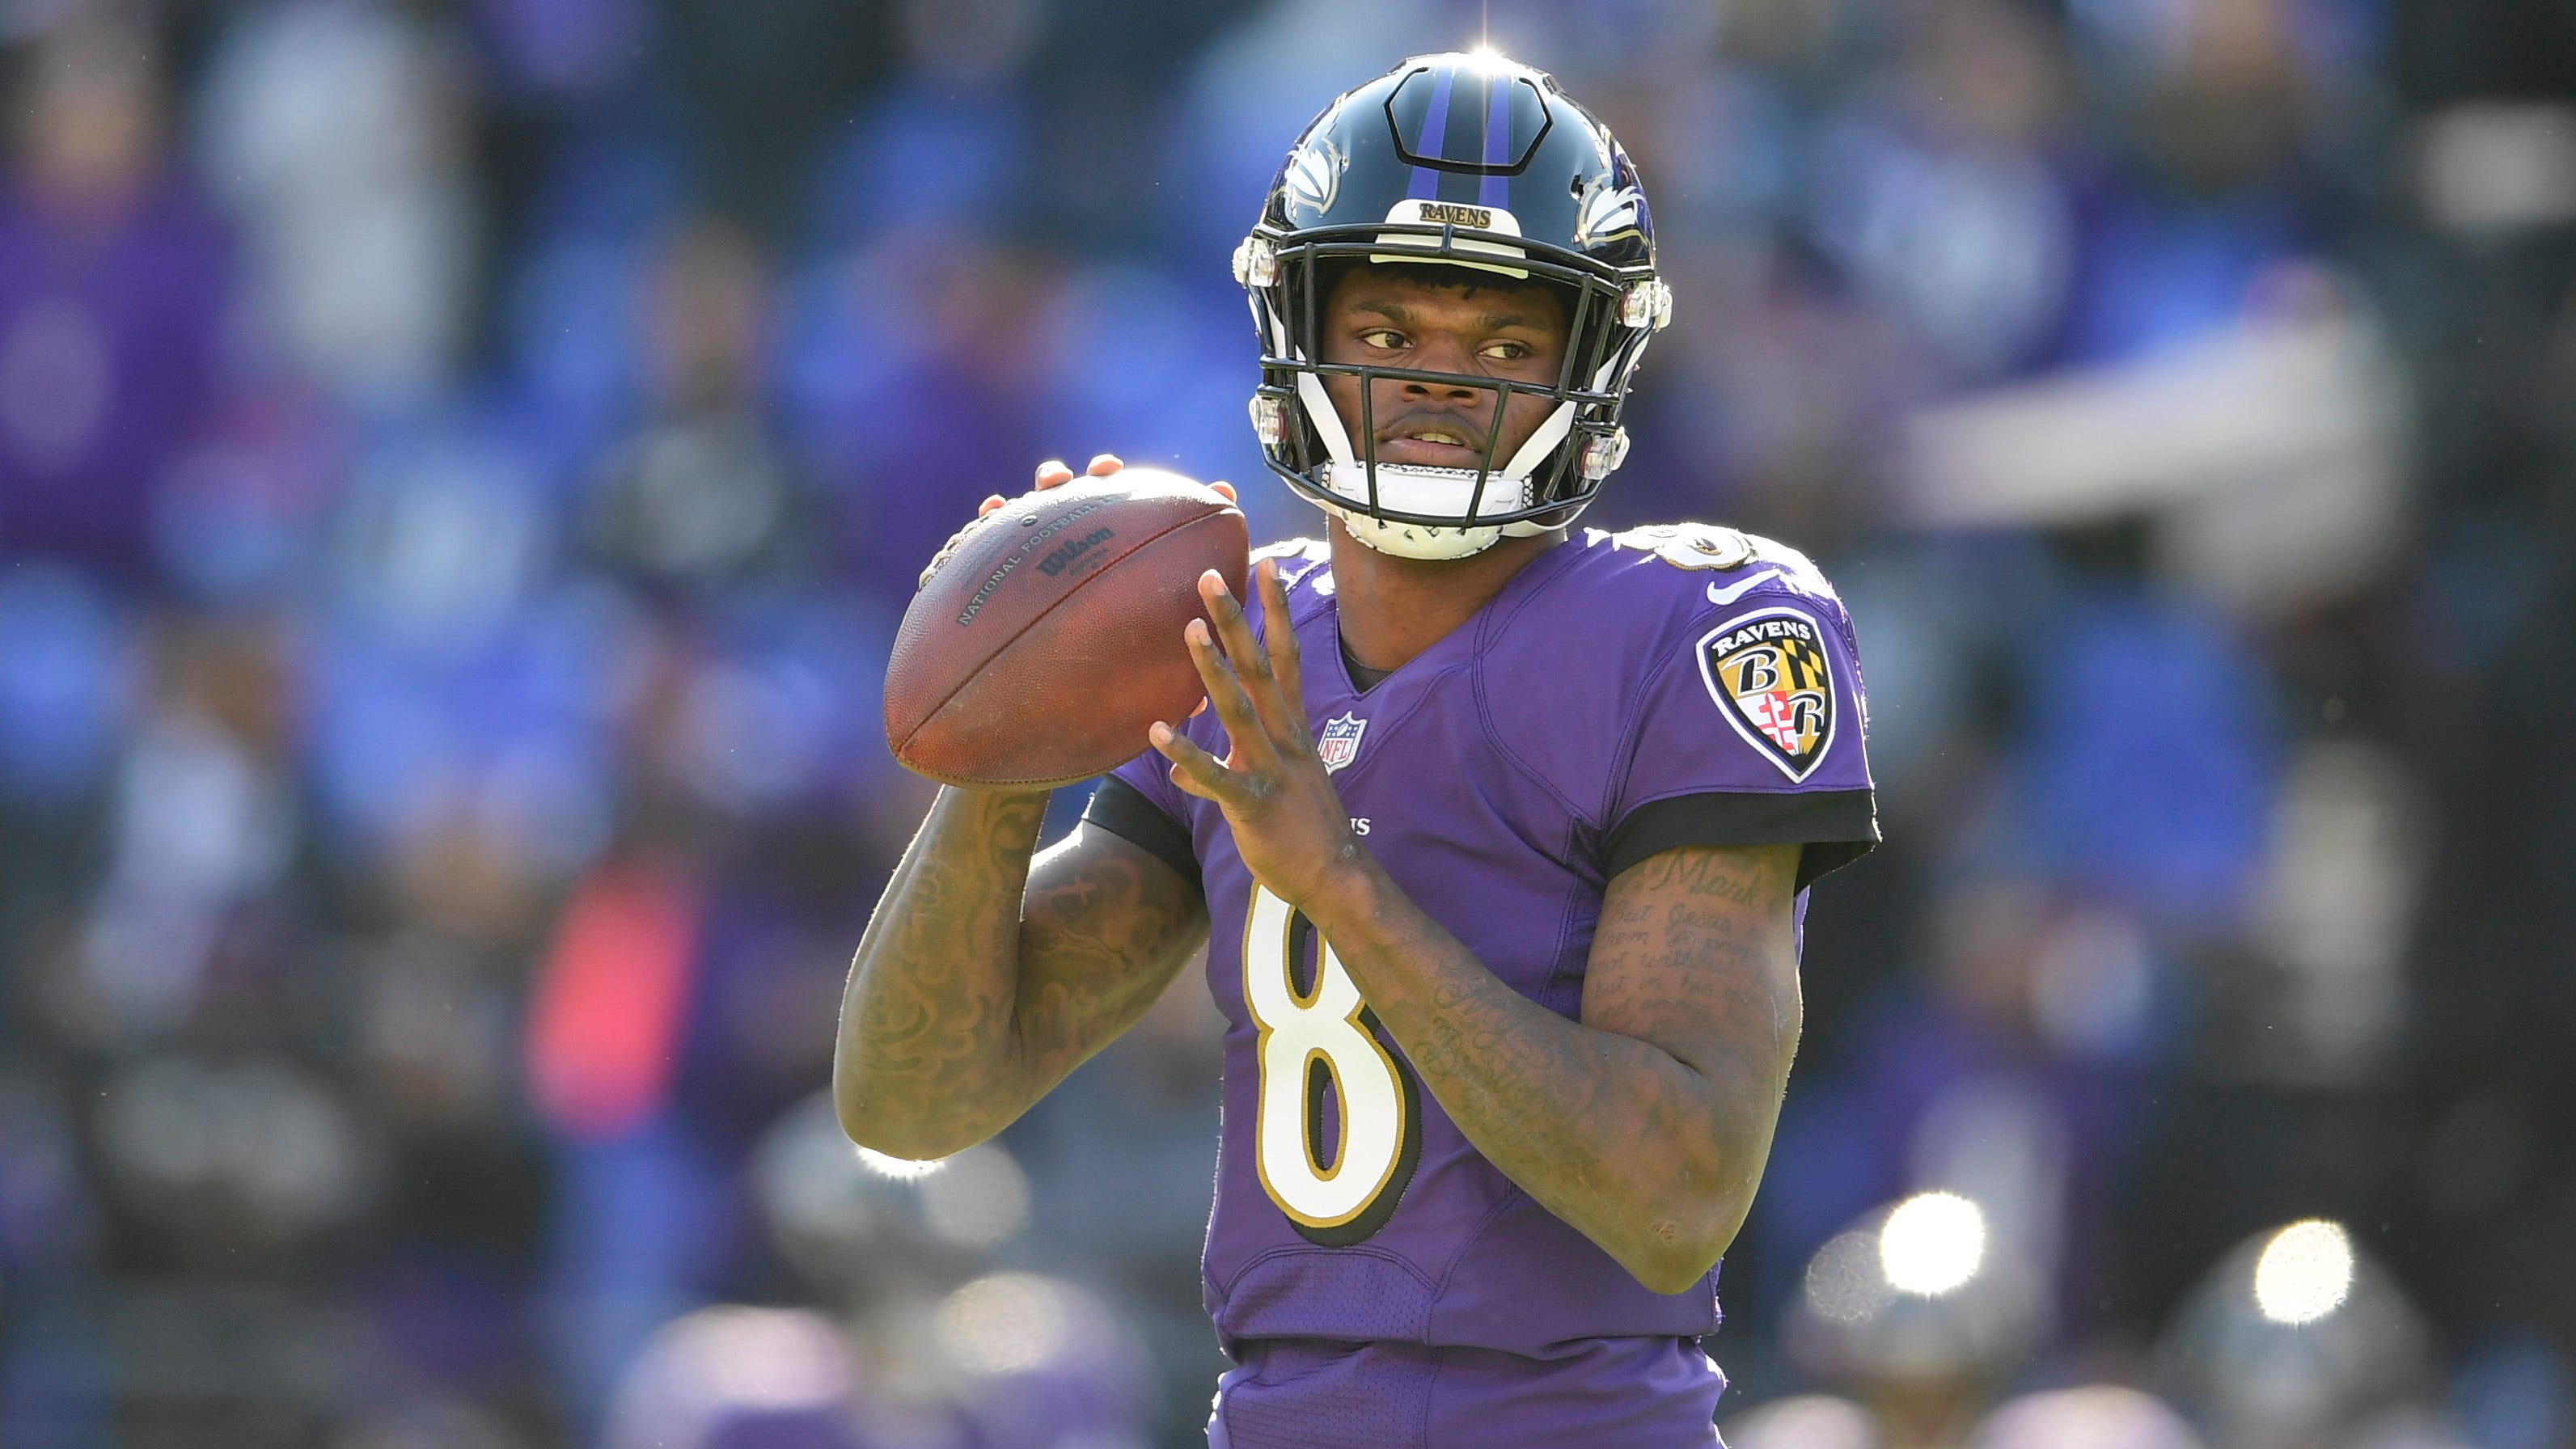 Opinion: Lamar Jackson Era is in full swing for Ravens, who must build arou...